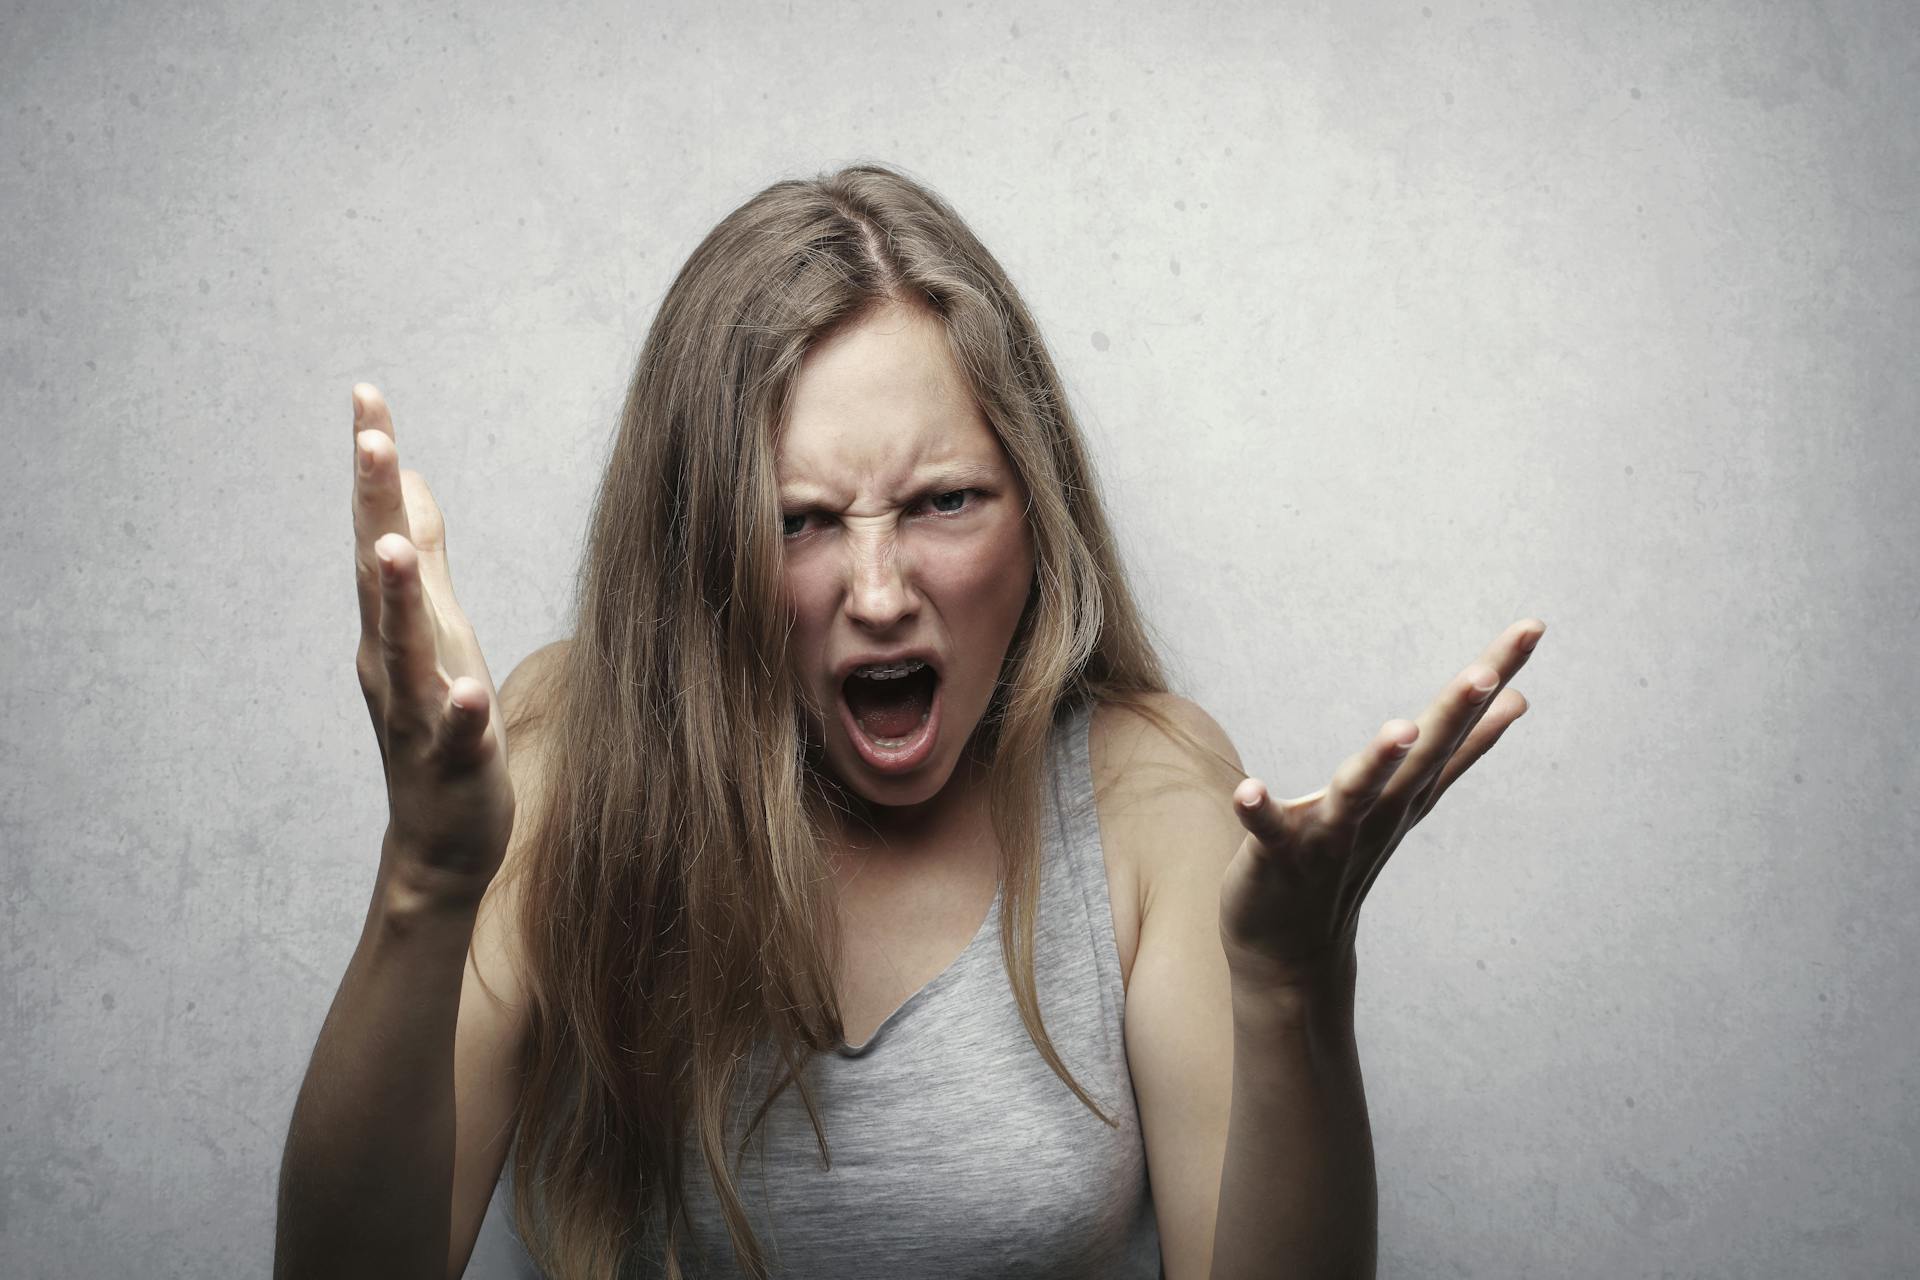 An angry woman shouting | Source: Pexels